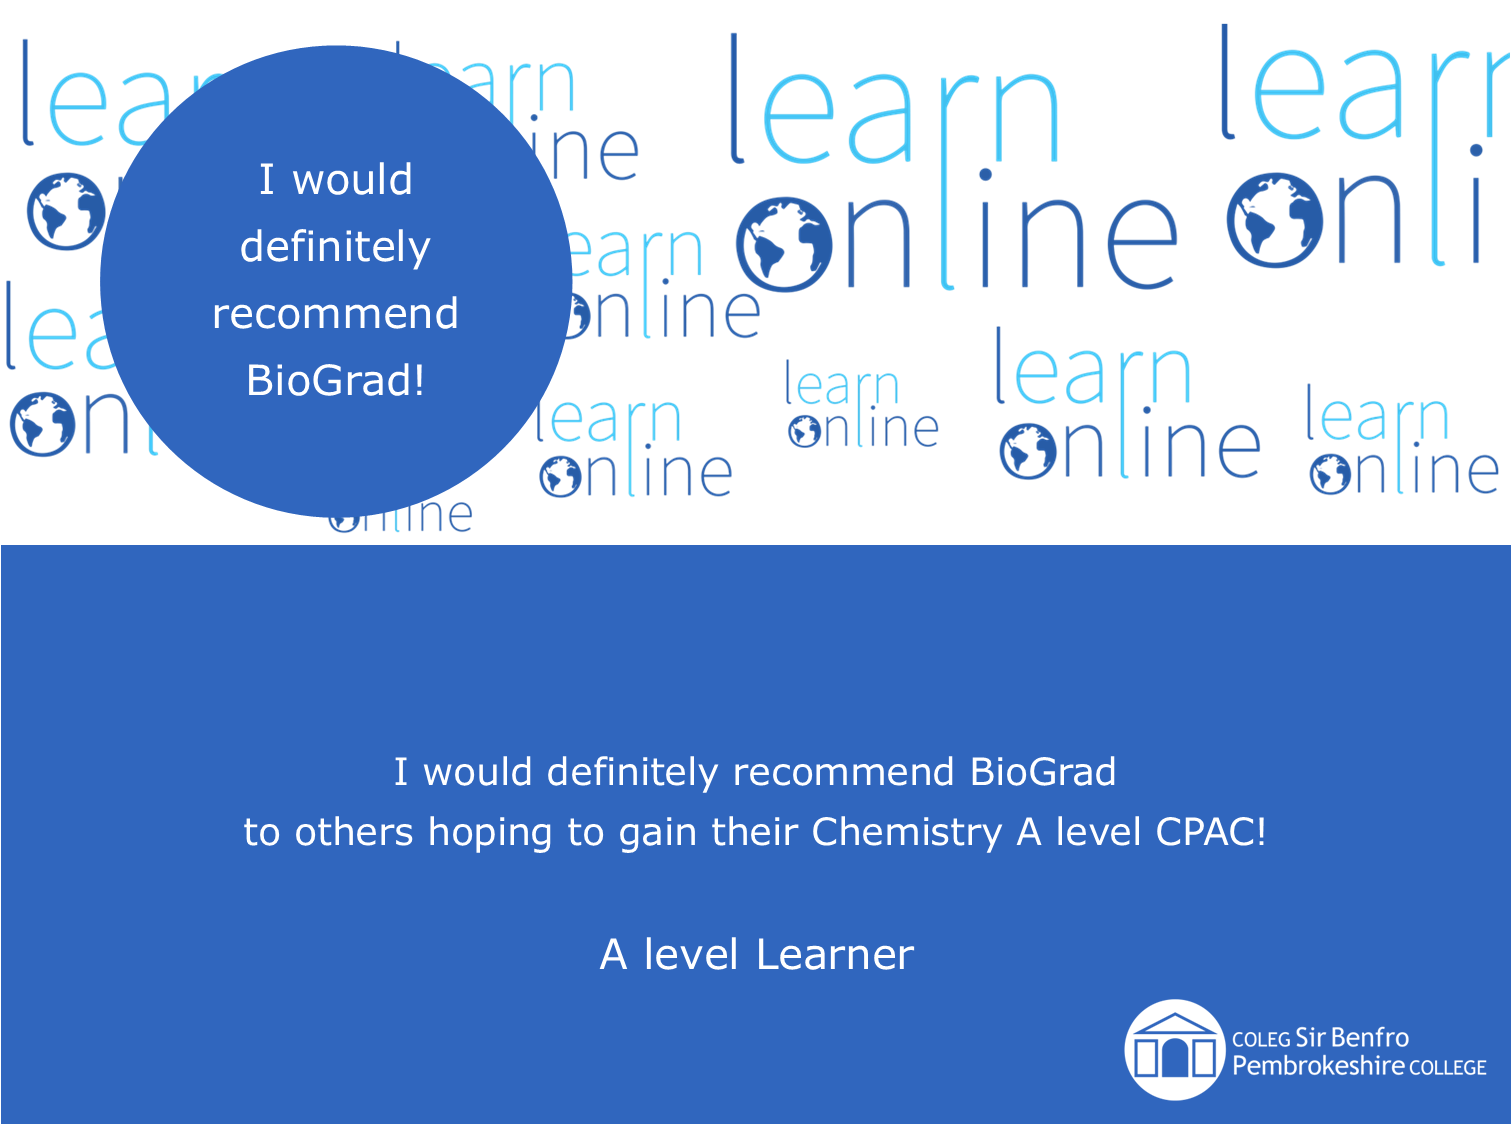 I would definitely recommend BioGrad to others hoping to gain their Chemistry A level CPAC! A level Learner